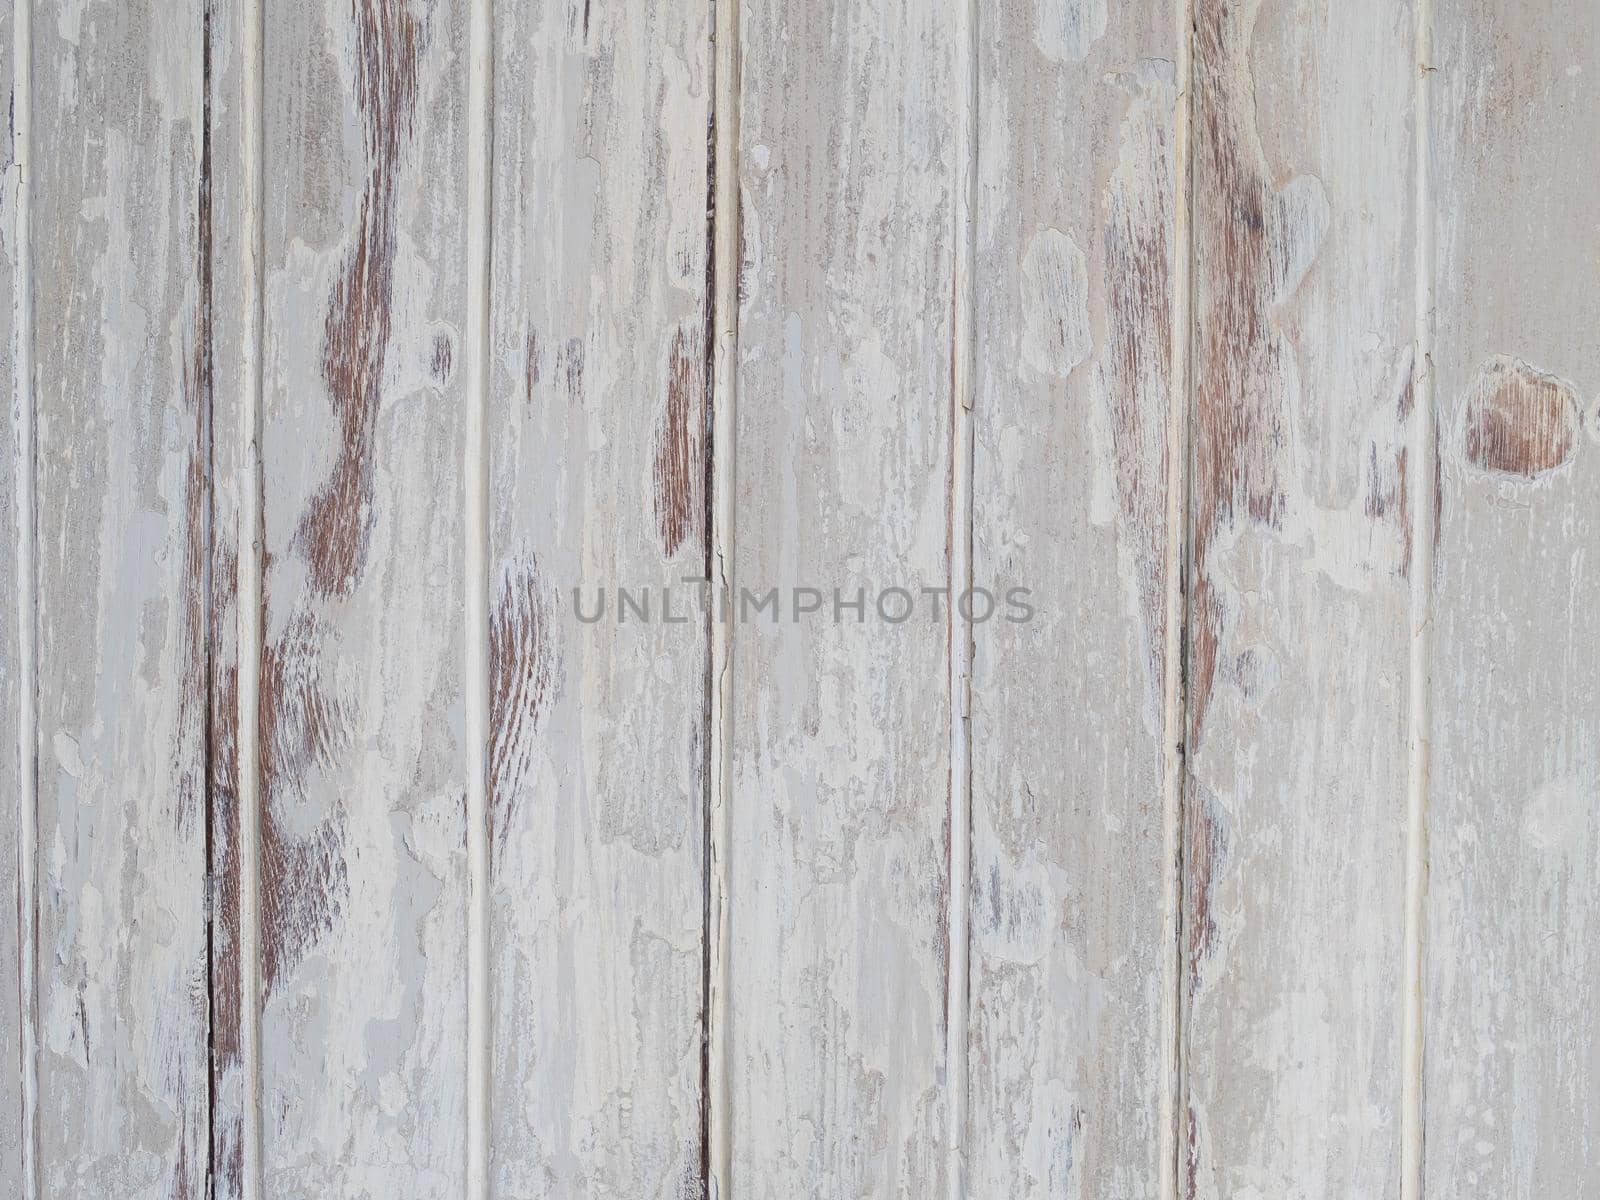 White Wood Backdrop Rustic Old Weathered Peeled Vintage Retro White Painted Grey Wooden Planks Wall by Petrichor